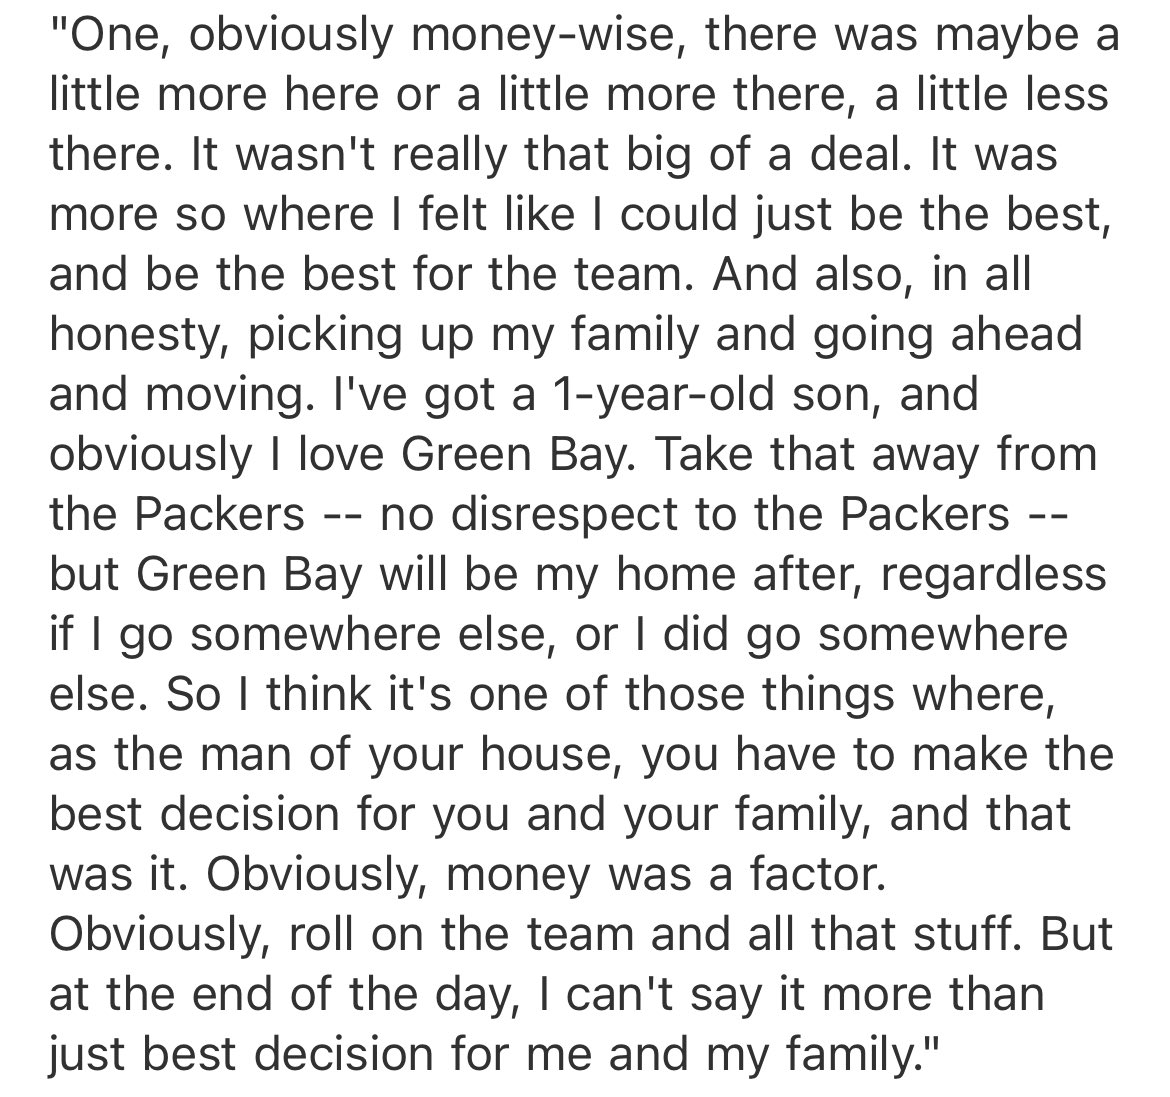 AJ Dillon said he had other offers in free agency before re-signing with #Packers this offseason. Asked him why returning on four-year qualifying offer was best option for him.